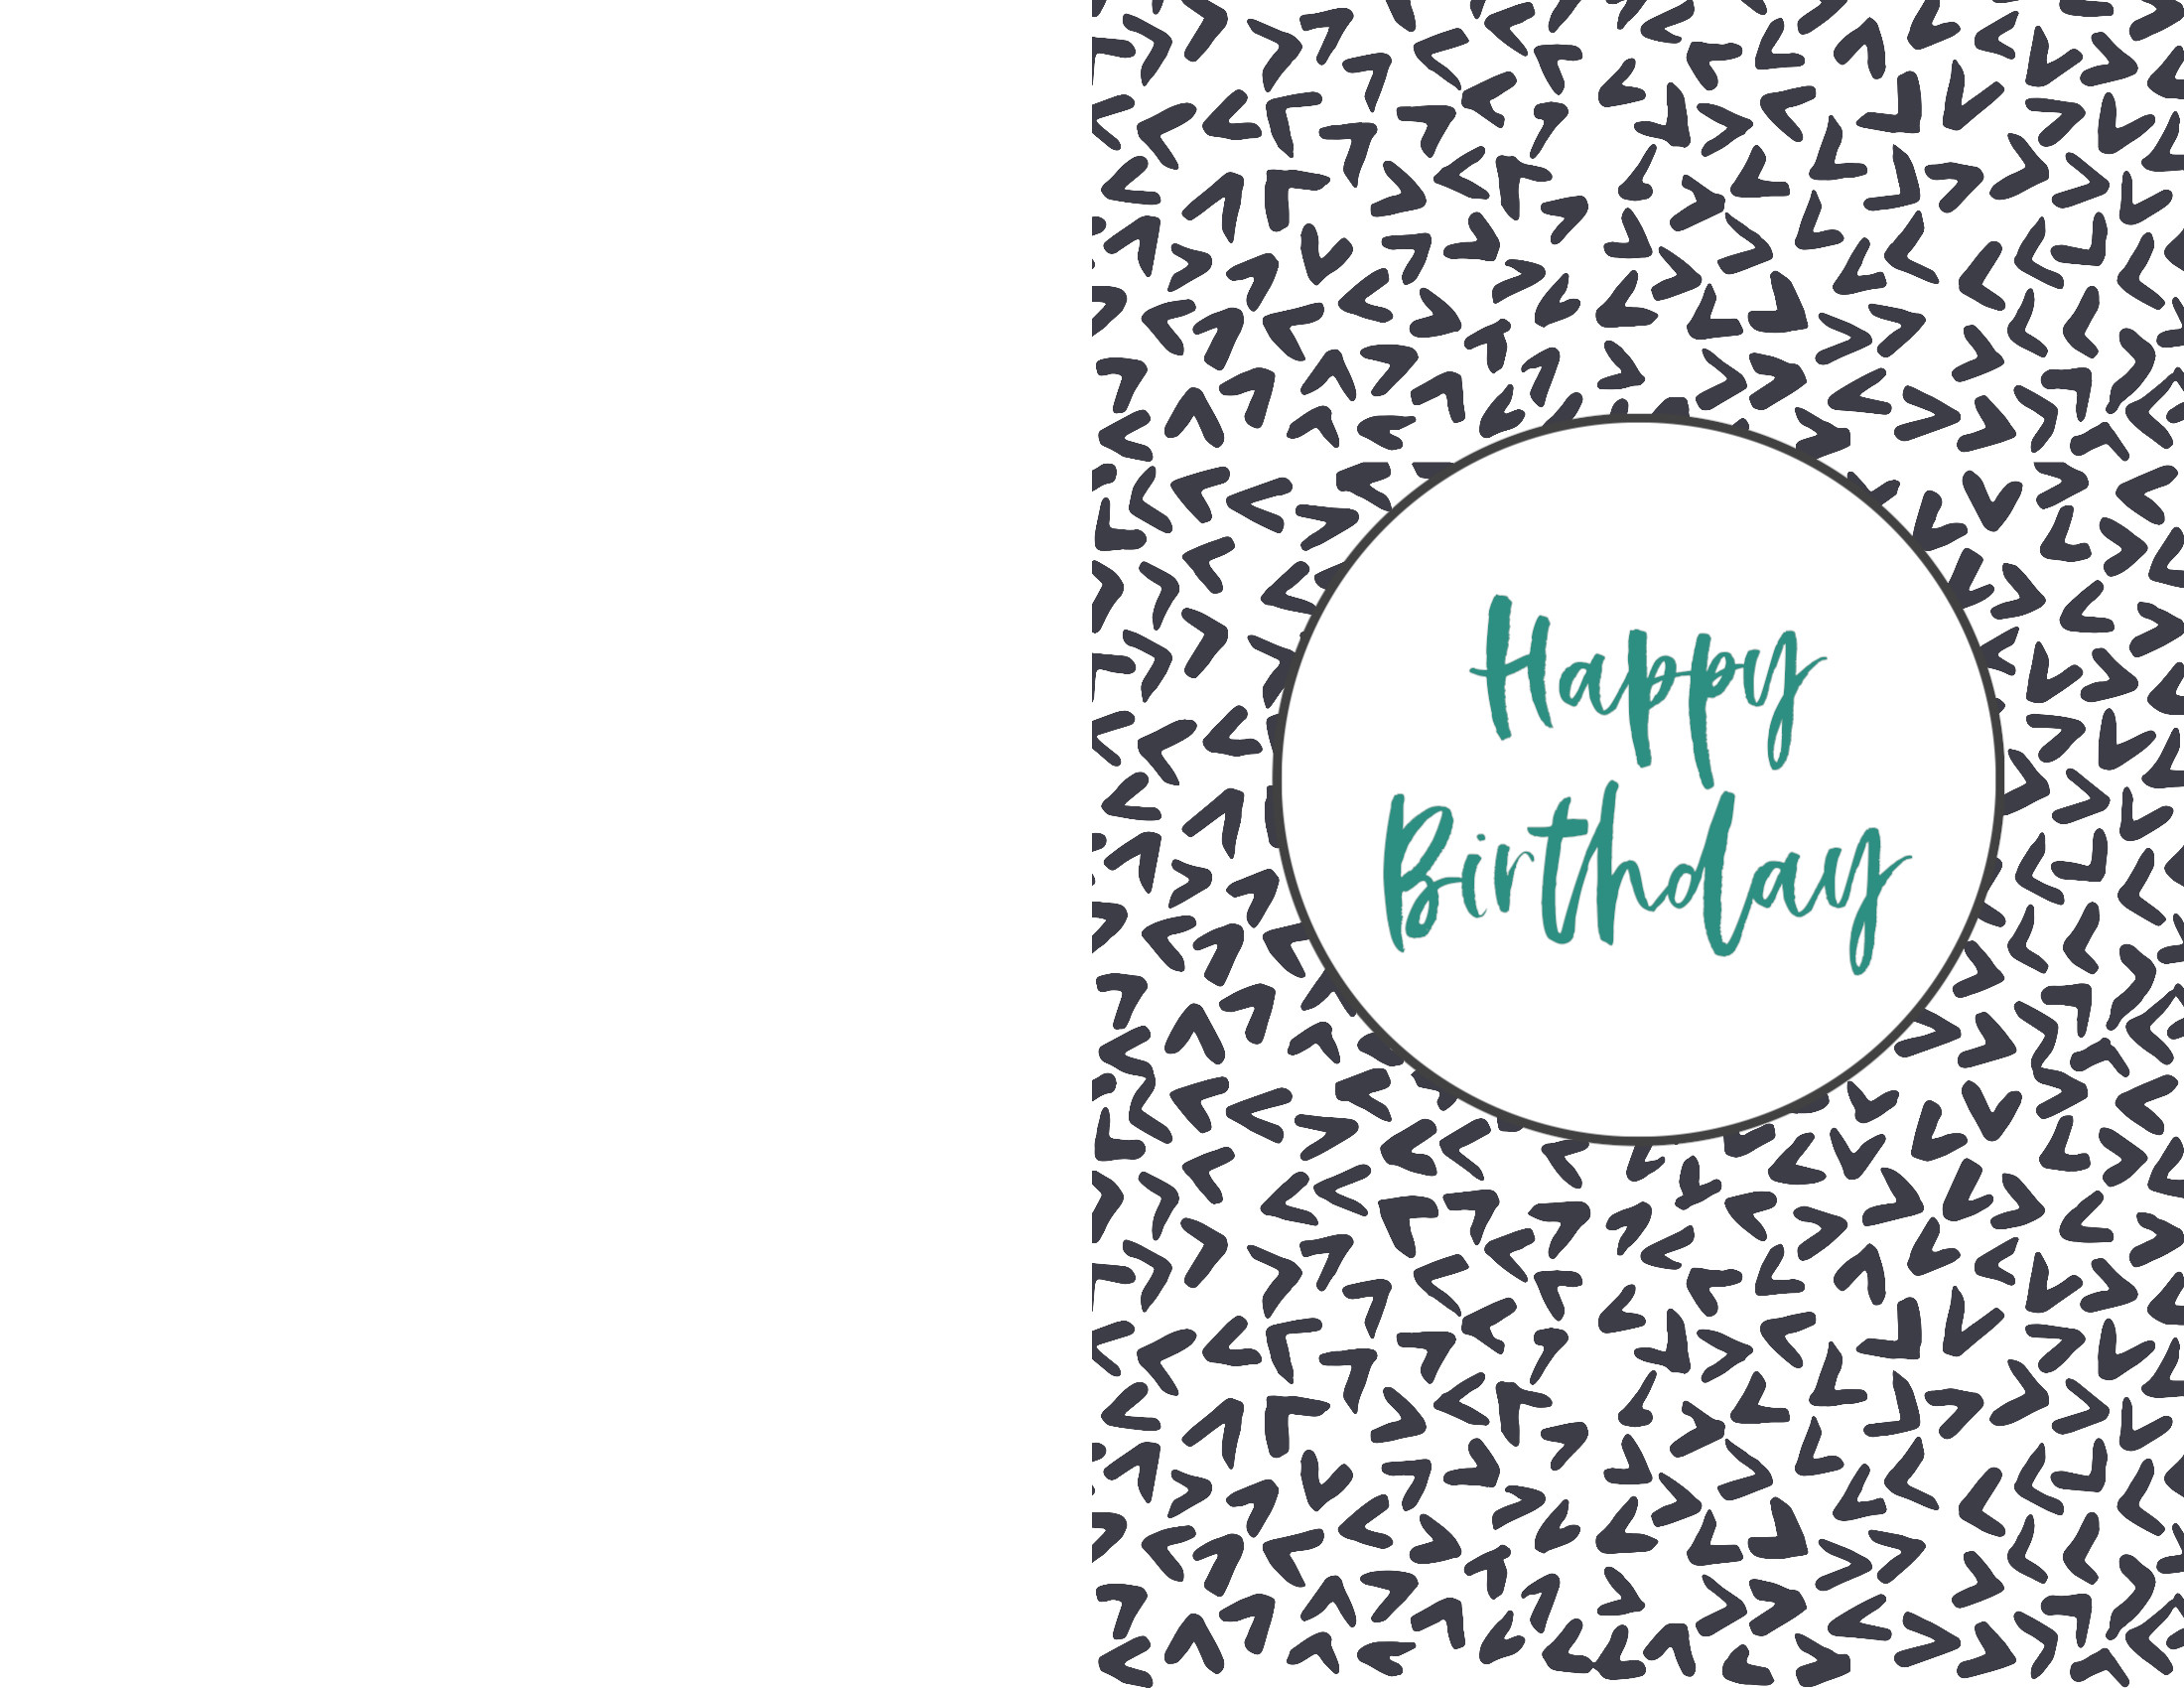 Birthday Cards To Print Out
 Free Printable Birthday Cards Paper Trail Design